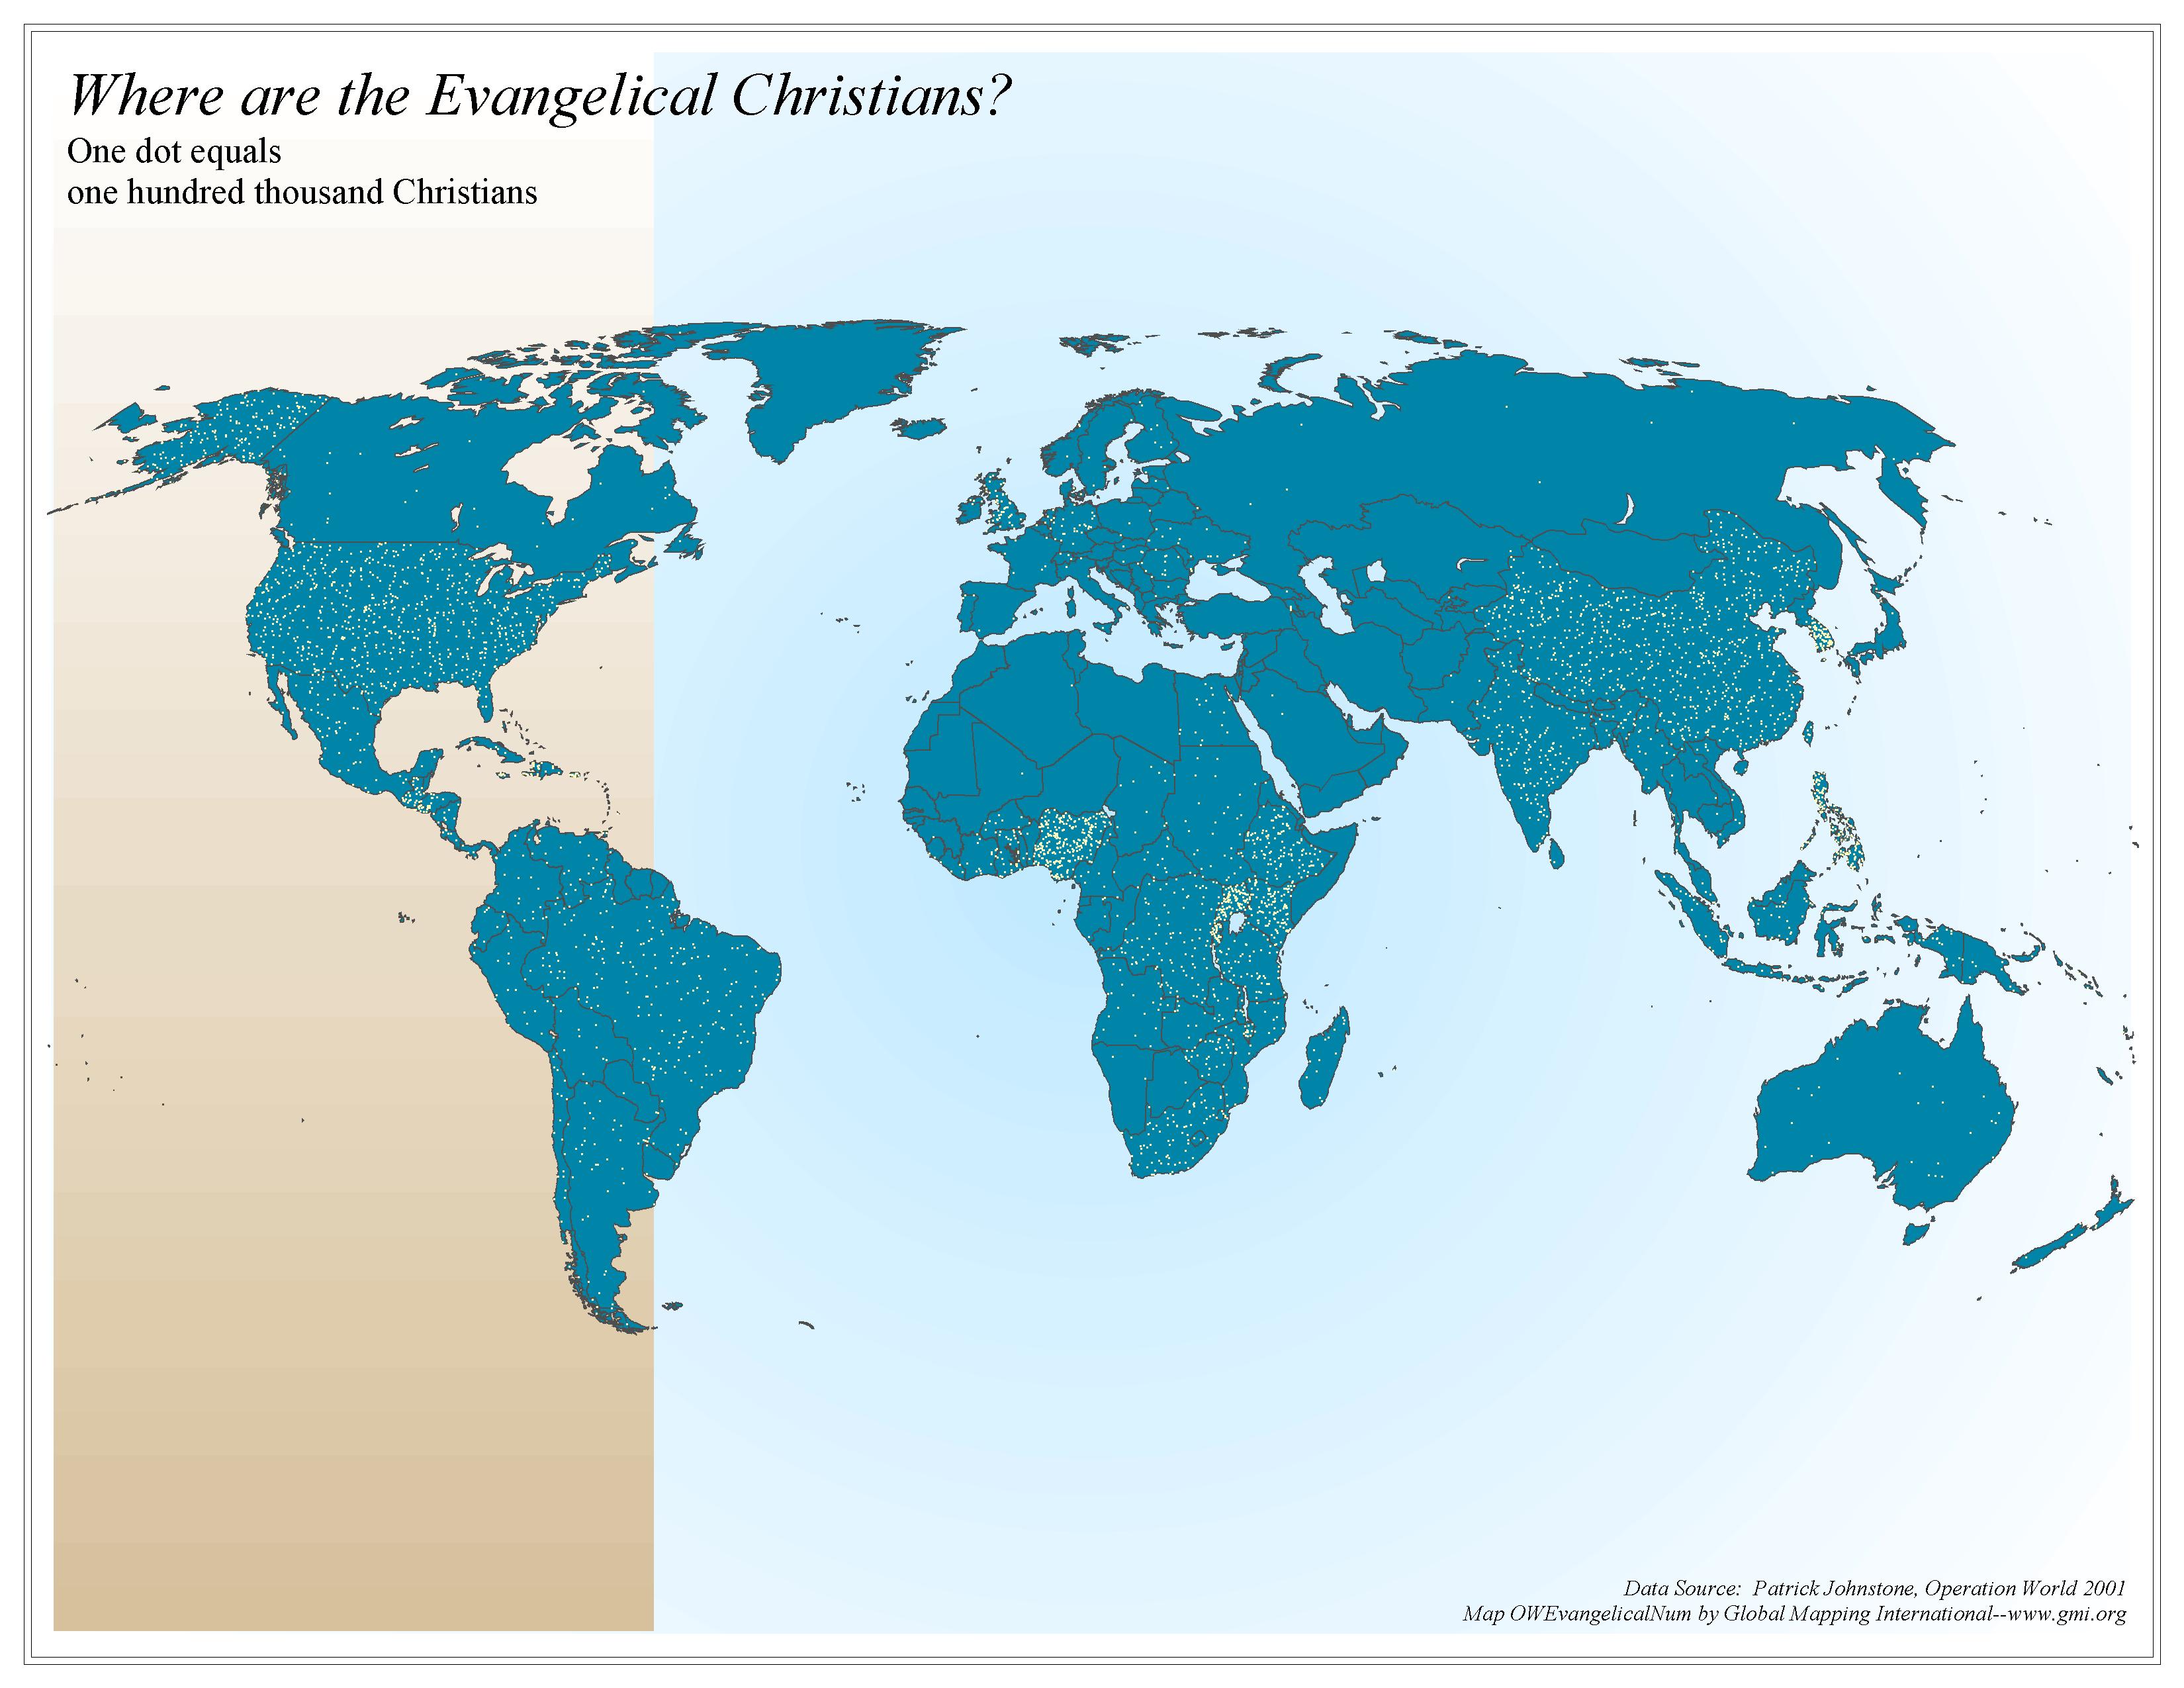 Where are the Evangelical Christians?